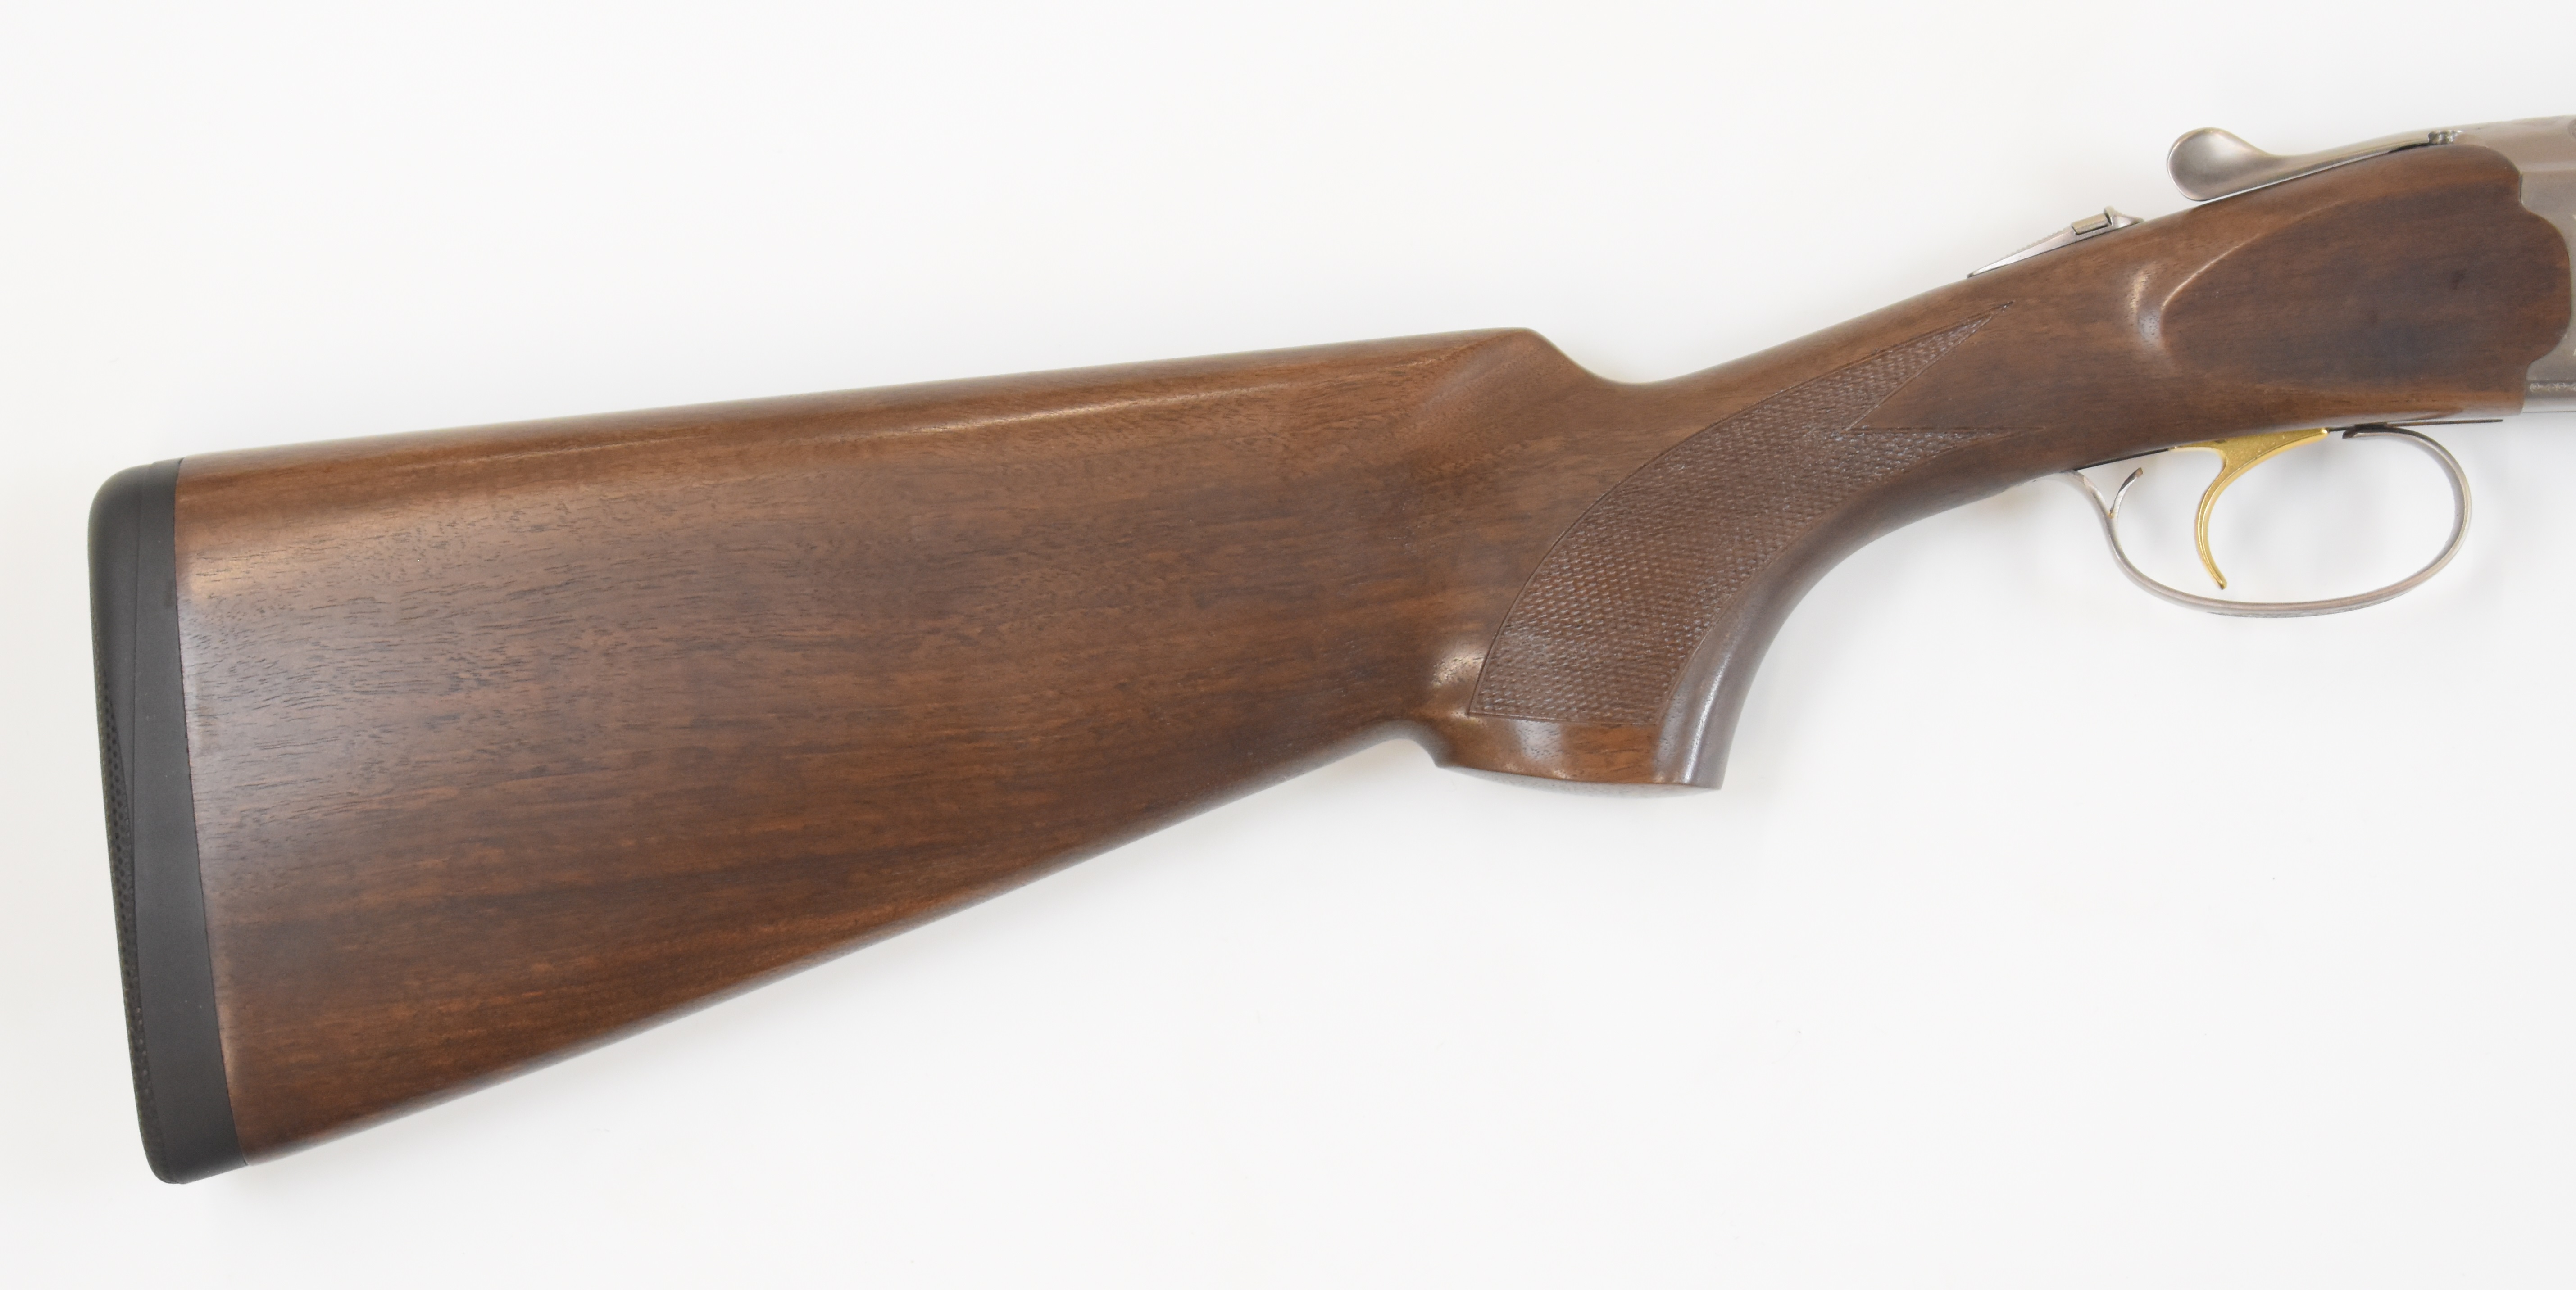 Beretta 686 Silver Pigeon I 28 bore over and under ejector shotgun with named and engraved lock - Image 3 of 28